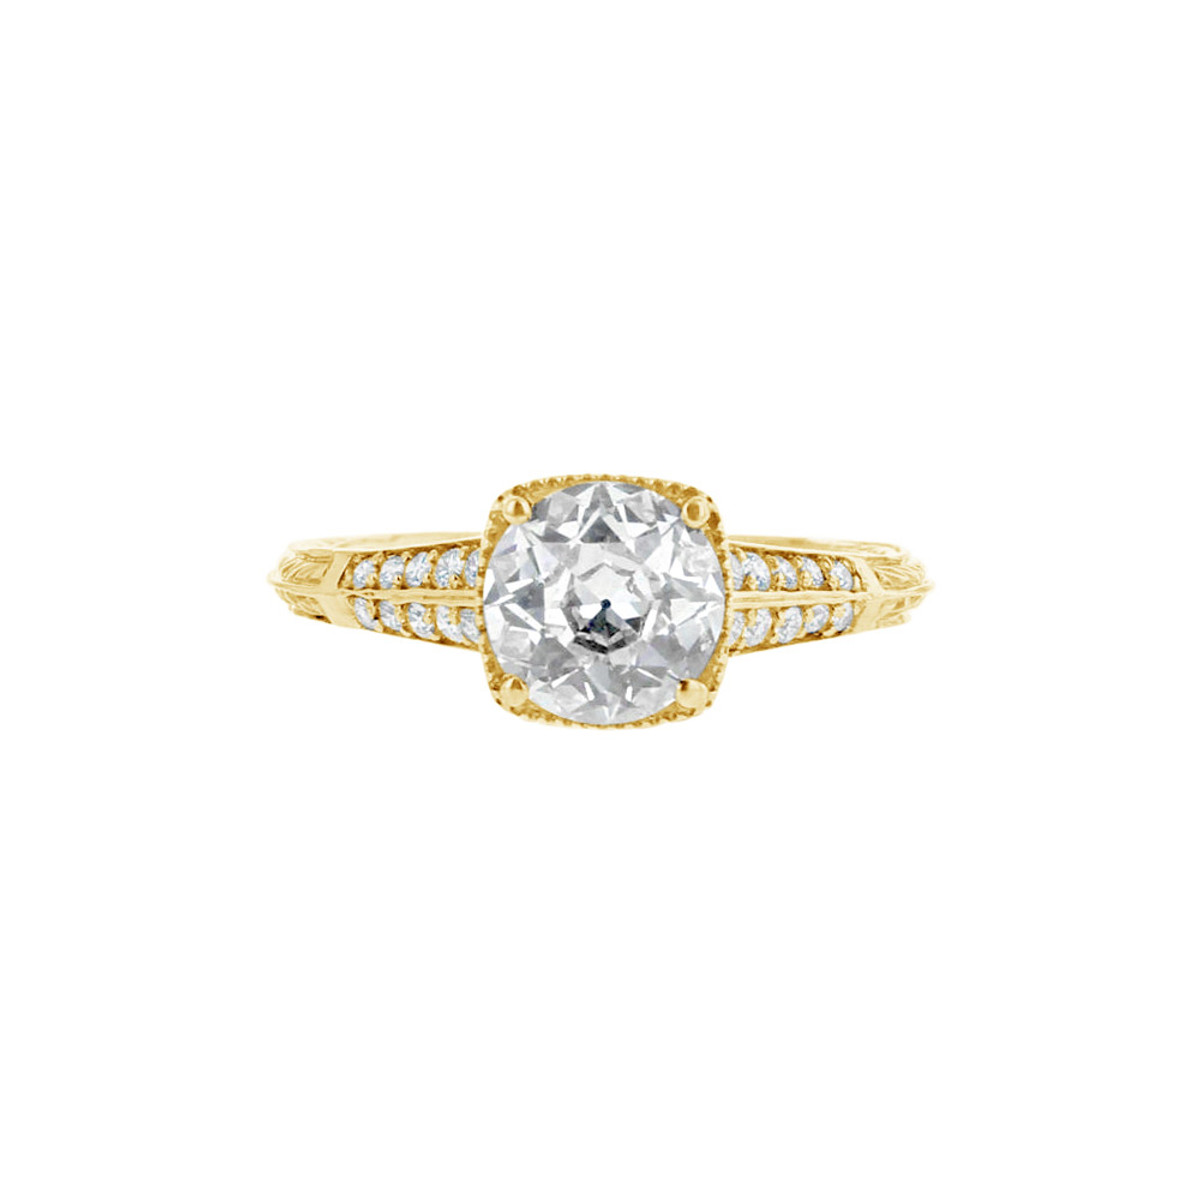 Engage By Hyde Park 18KT Yellow Gold & 1.54CT GIA Diamond Vintage Solitaire Engagement Ring-DSCRD0499 Product Image